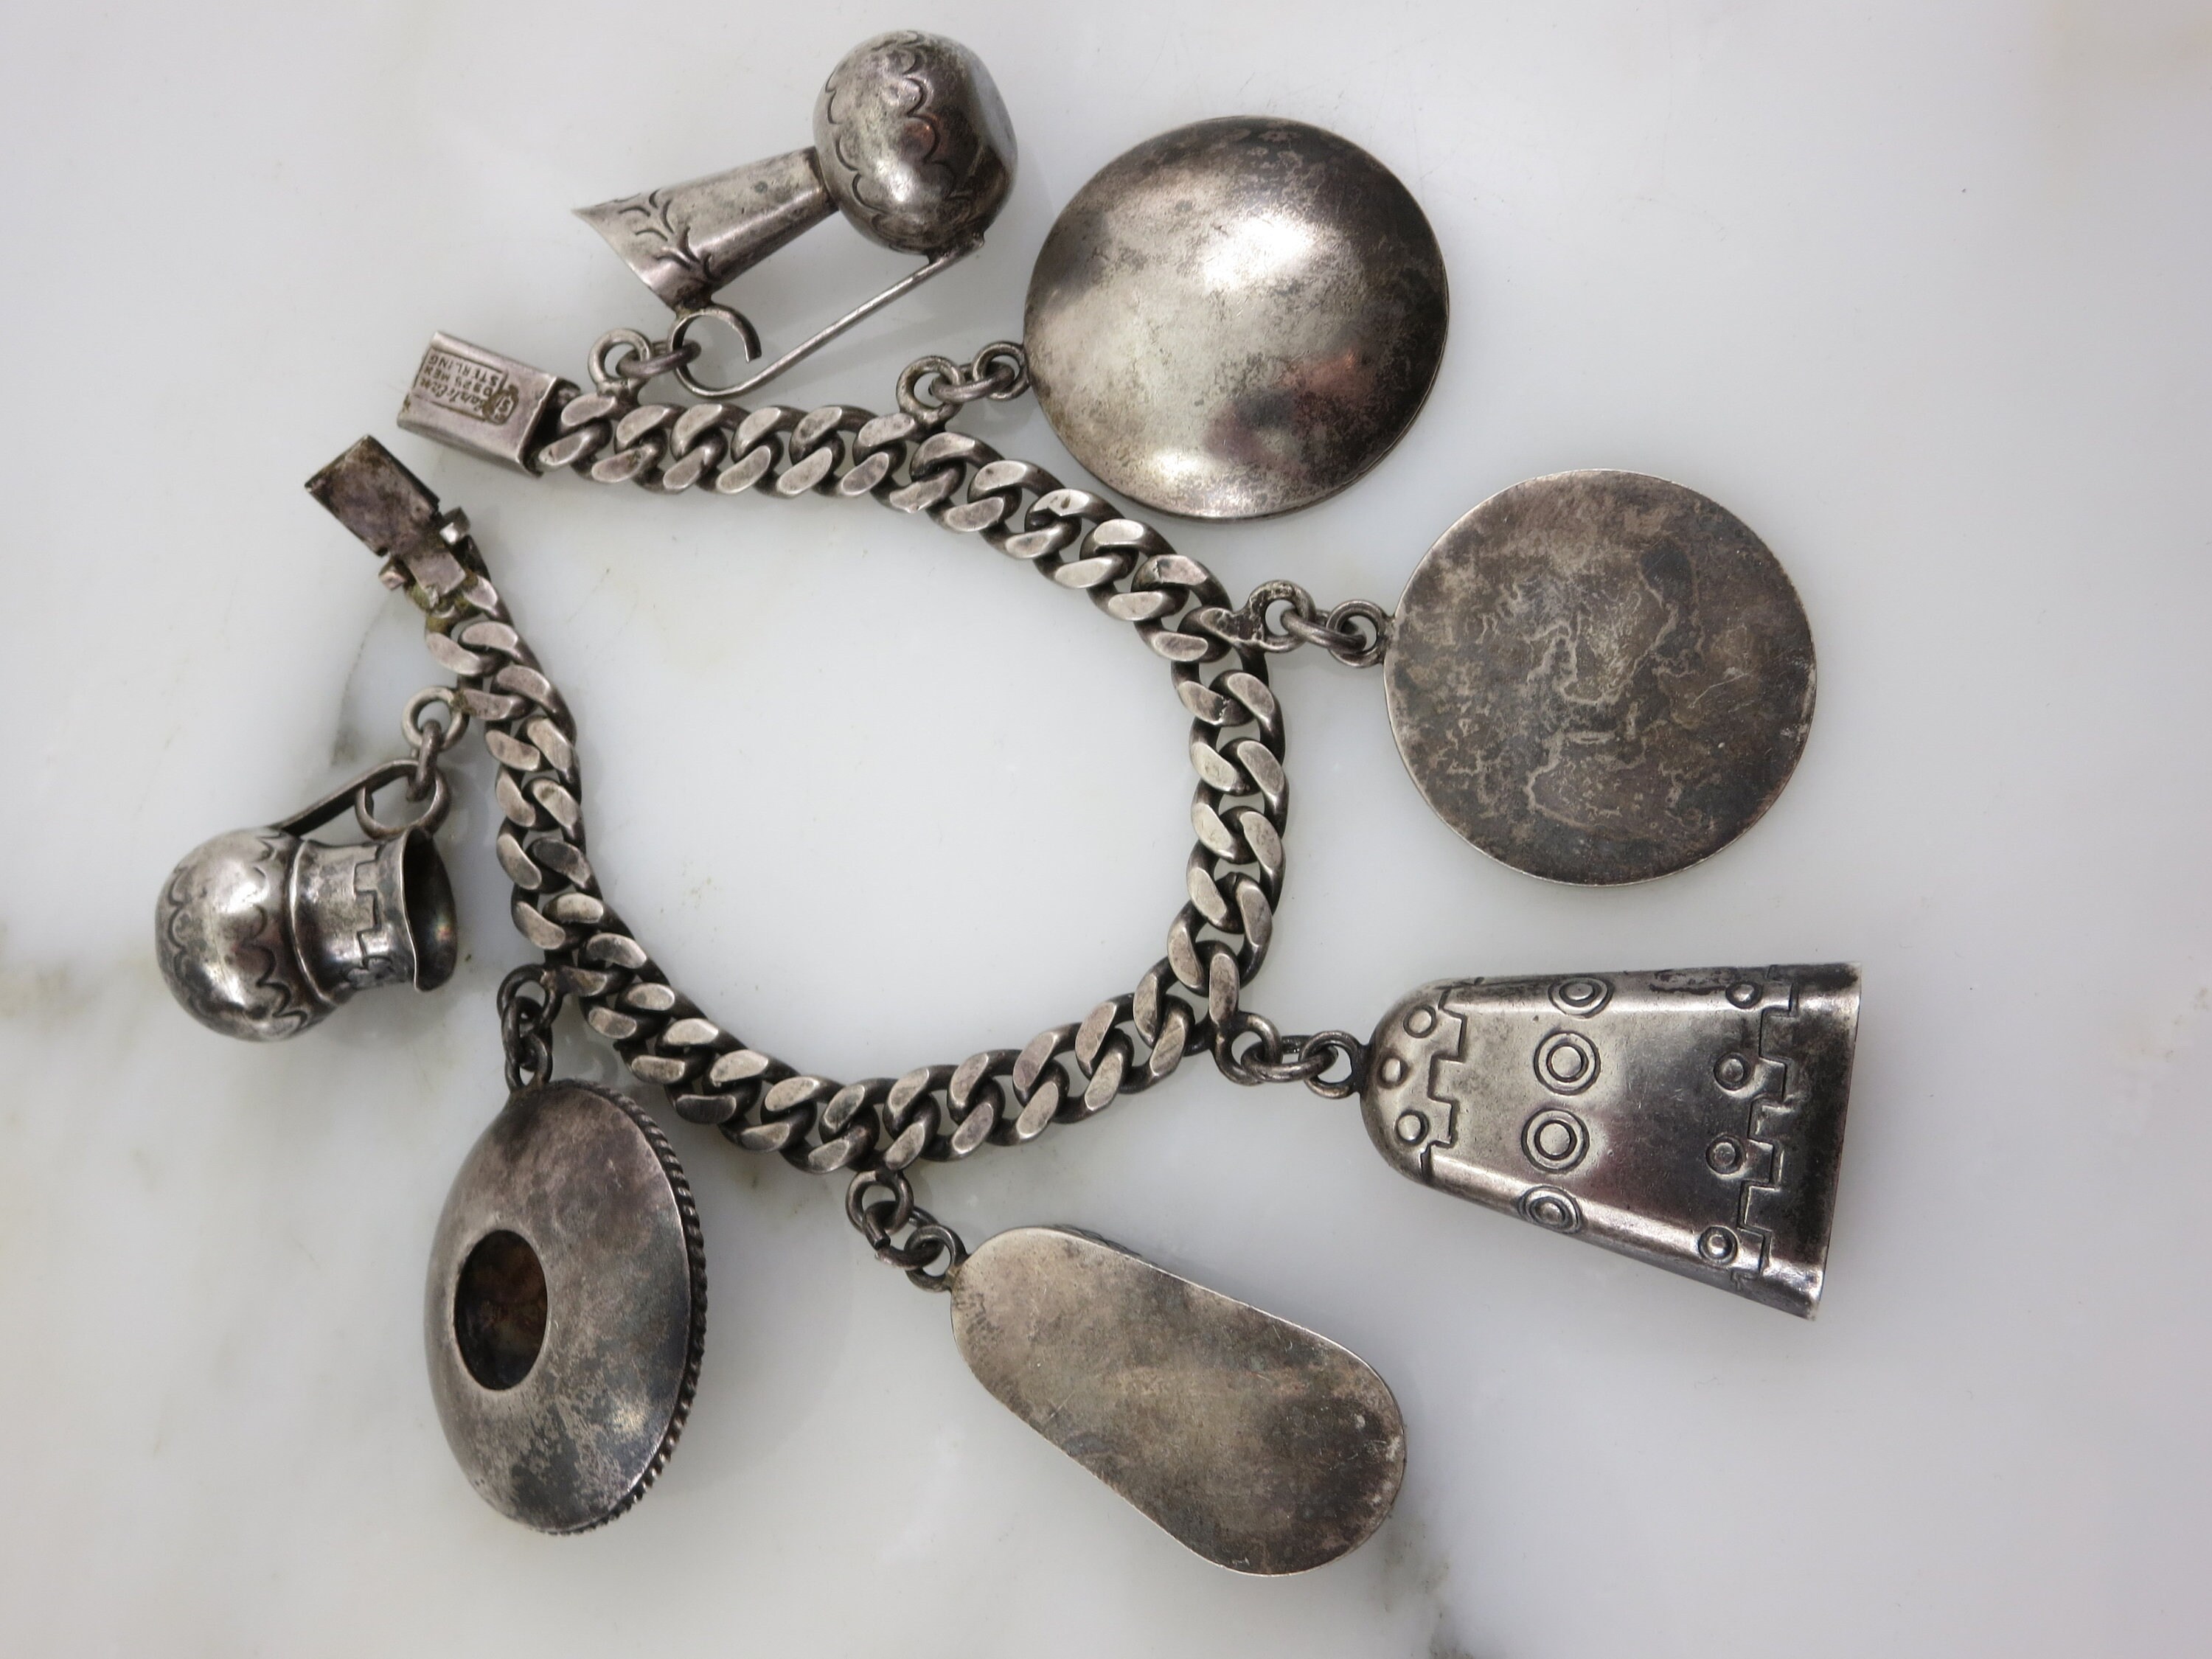 Mexican Silver Charm Bracelet - The Shop in the Bush